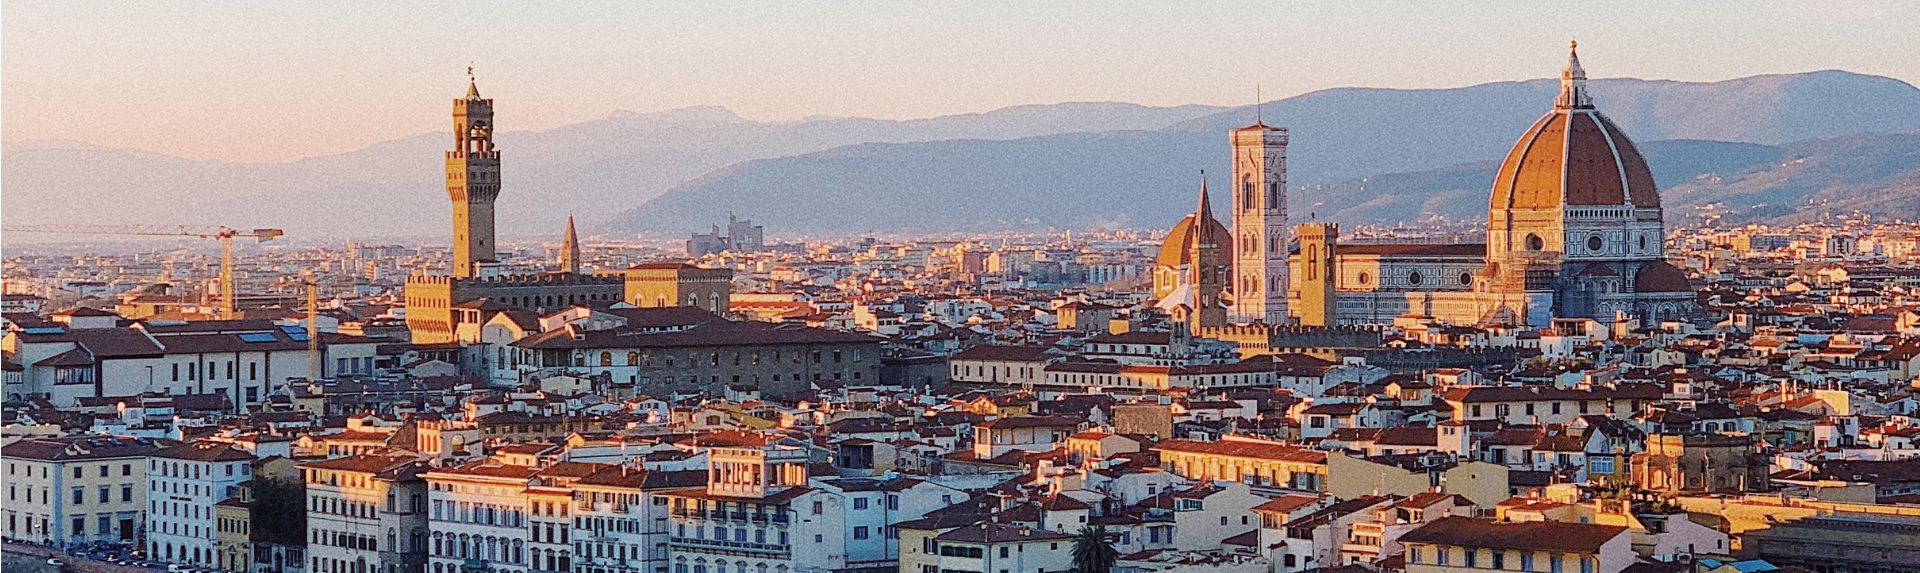 8 things you didn’t know about Florence